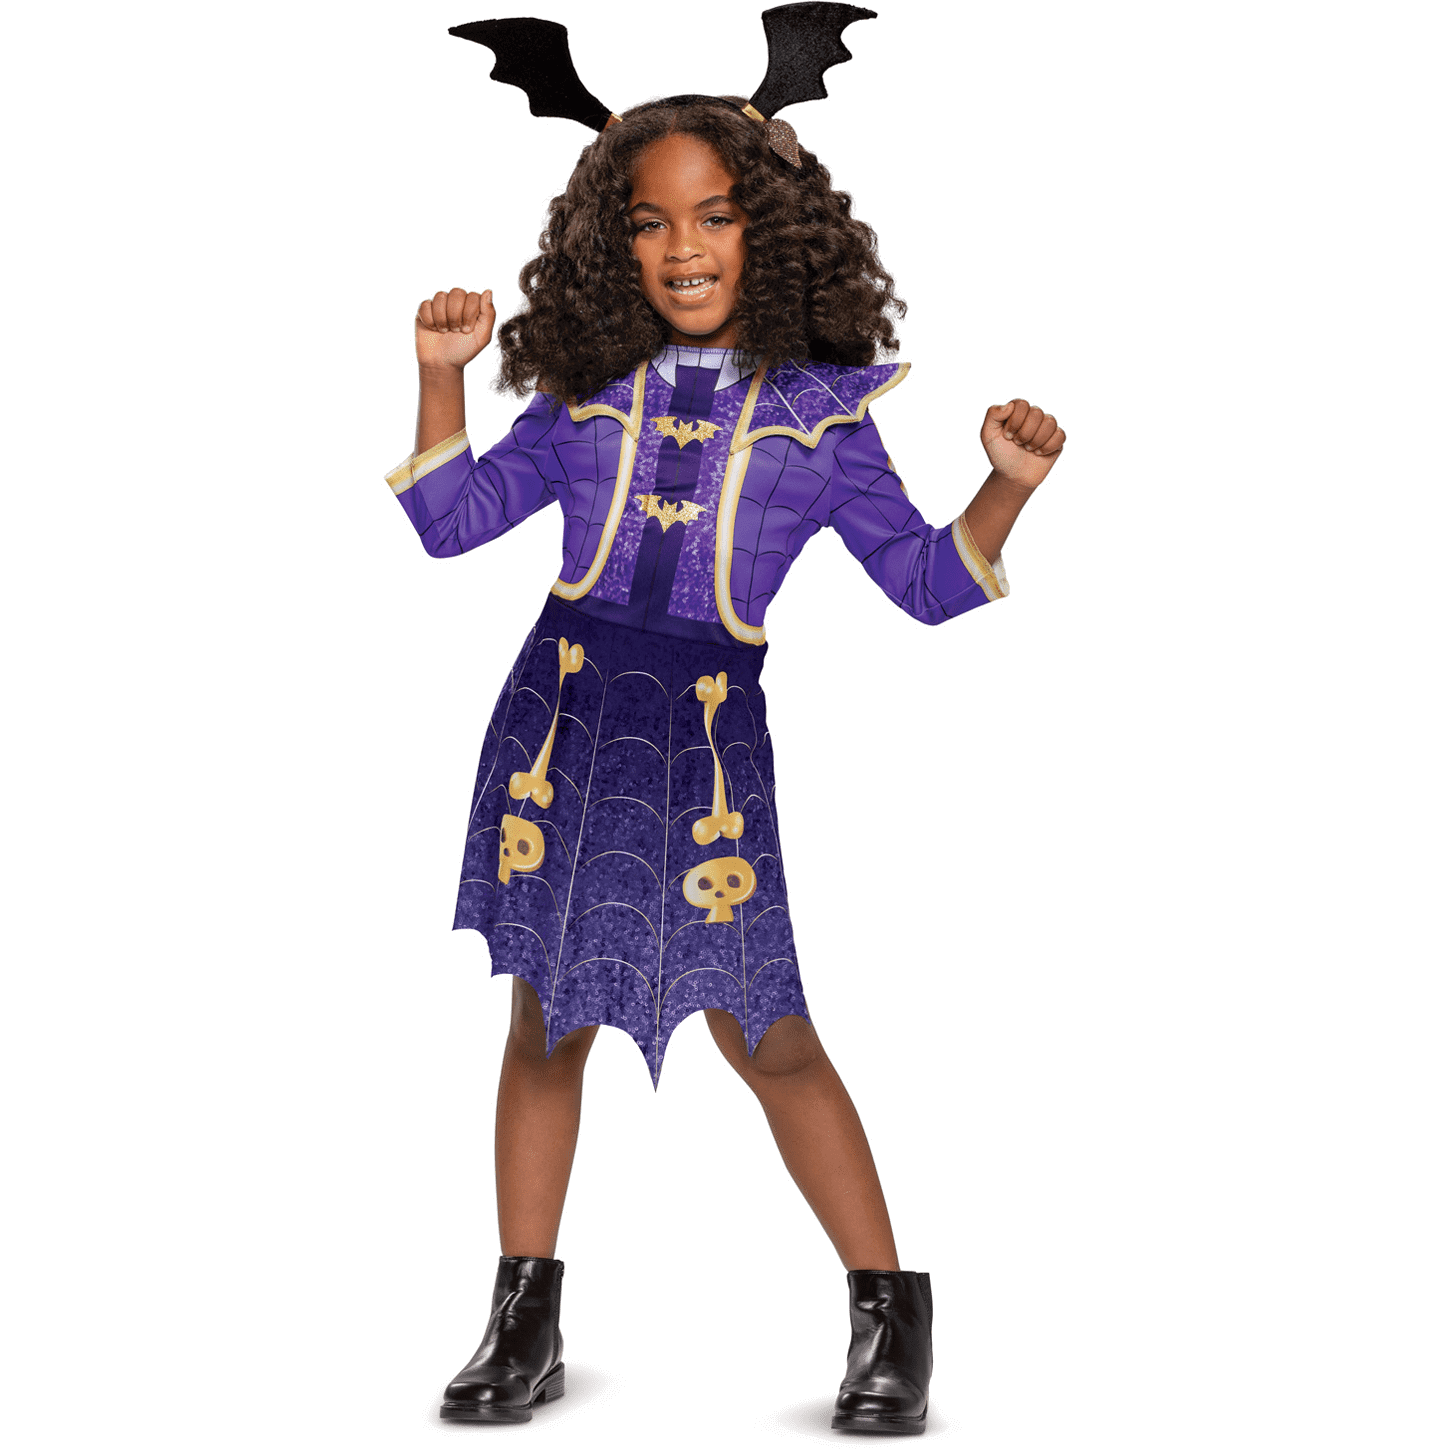 Disguise COSTUMES XS (3T-4T) Vampirina Ghoul Girl Classic